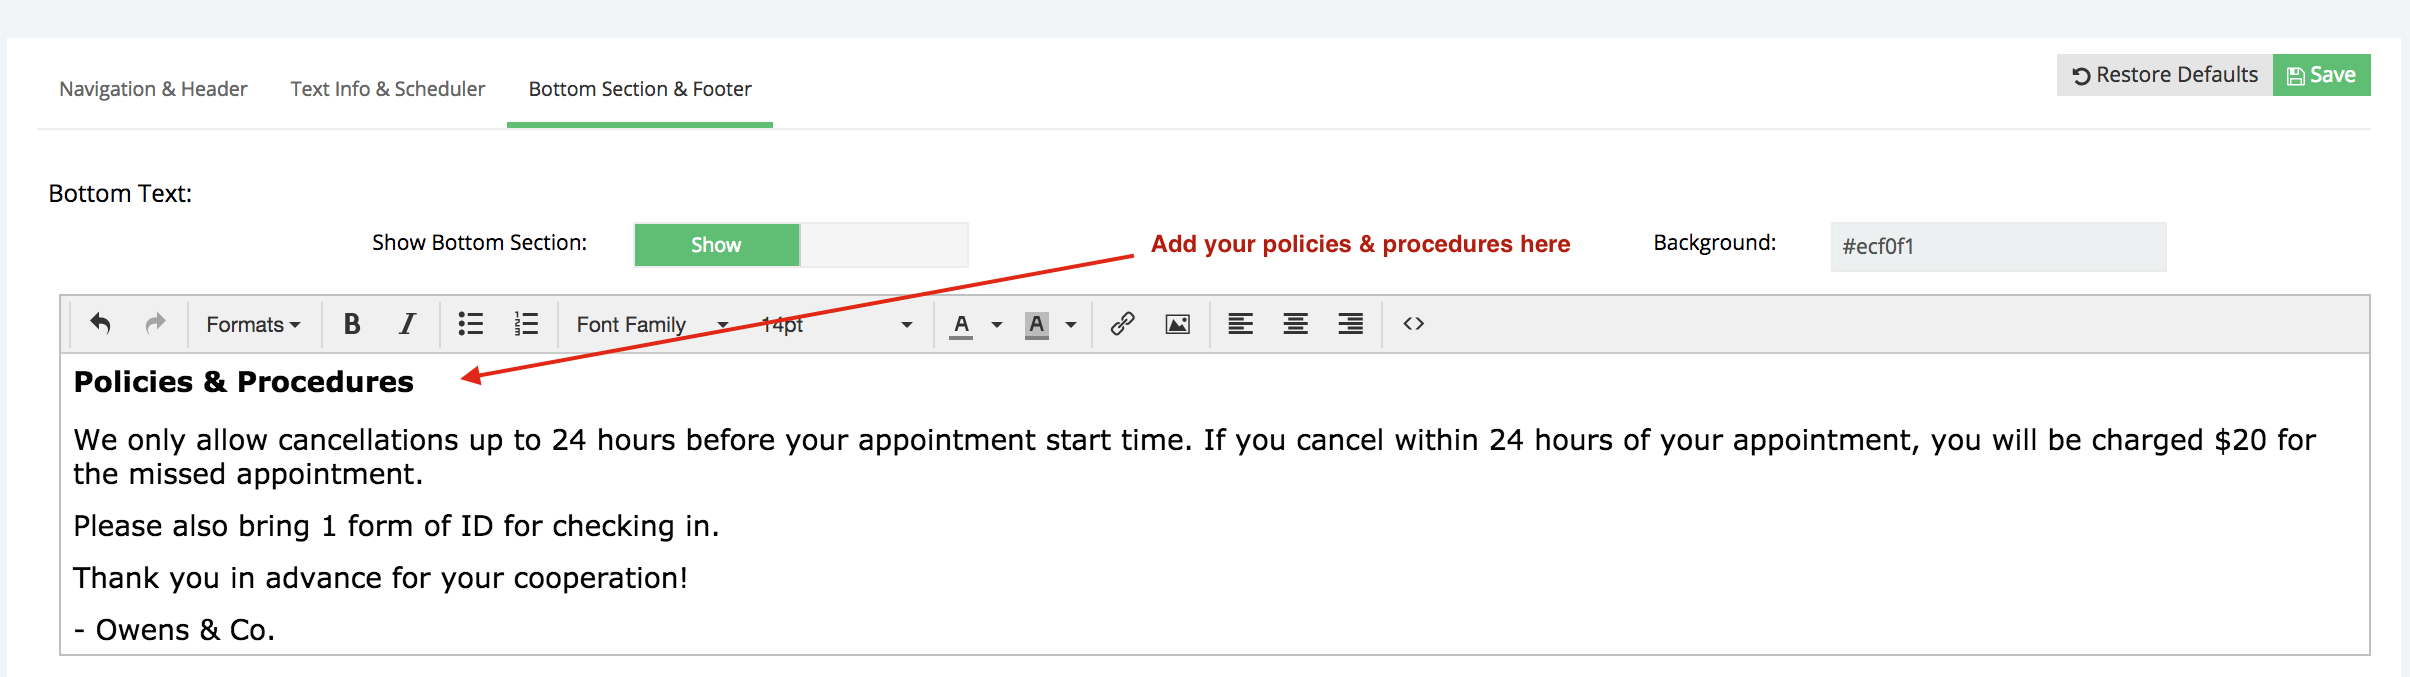 What's a Reasonable Cancellation Policy for Online Appointments?-1